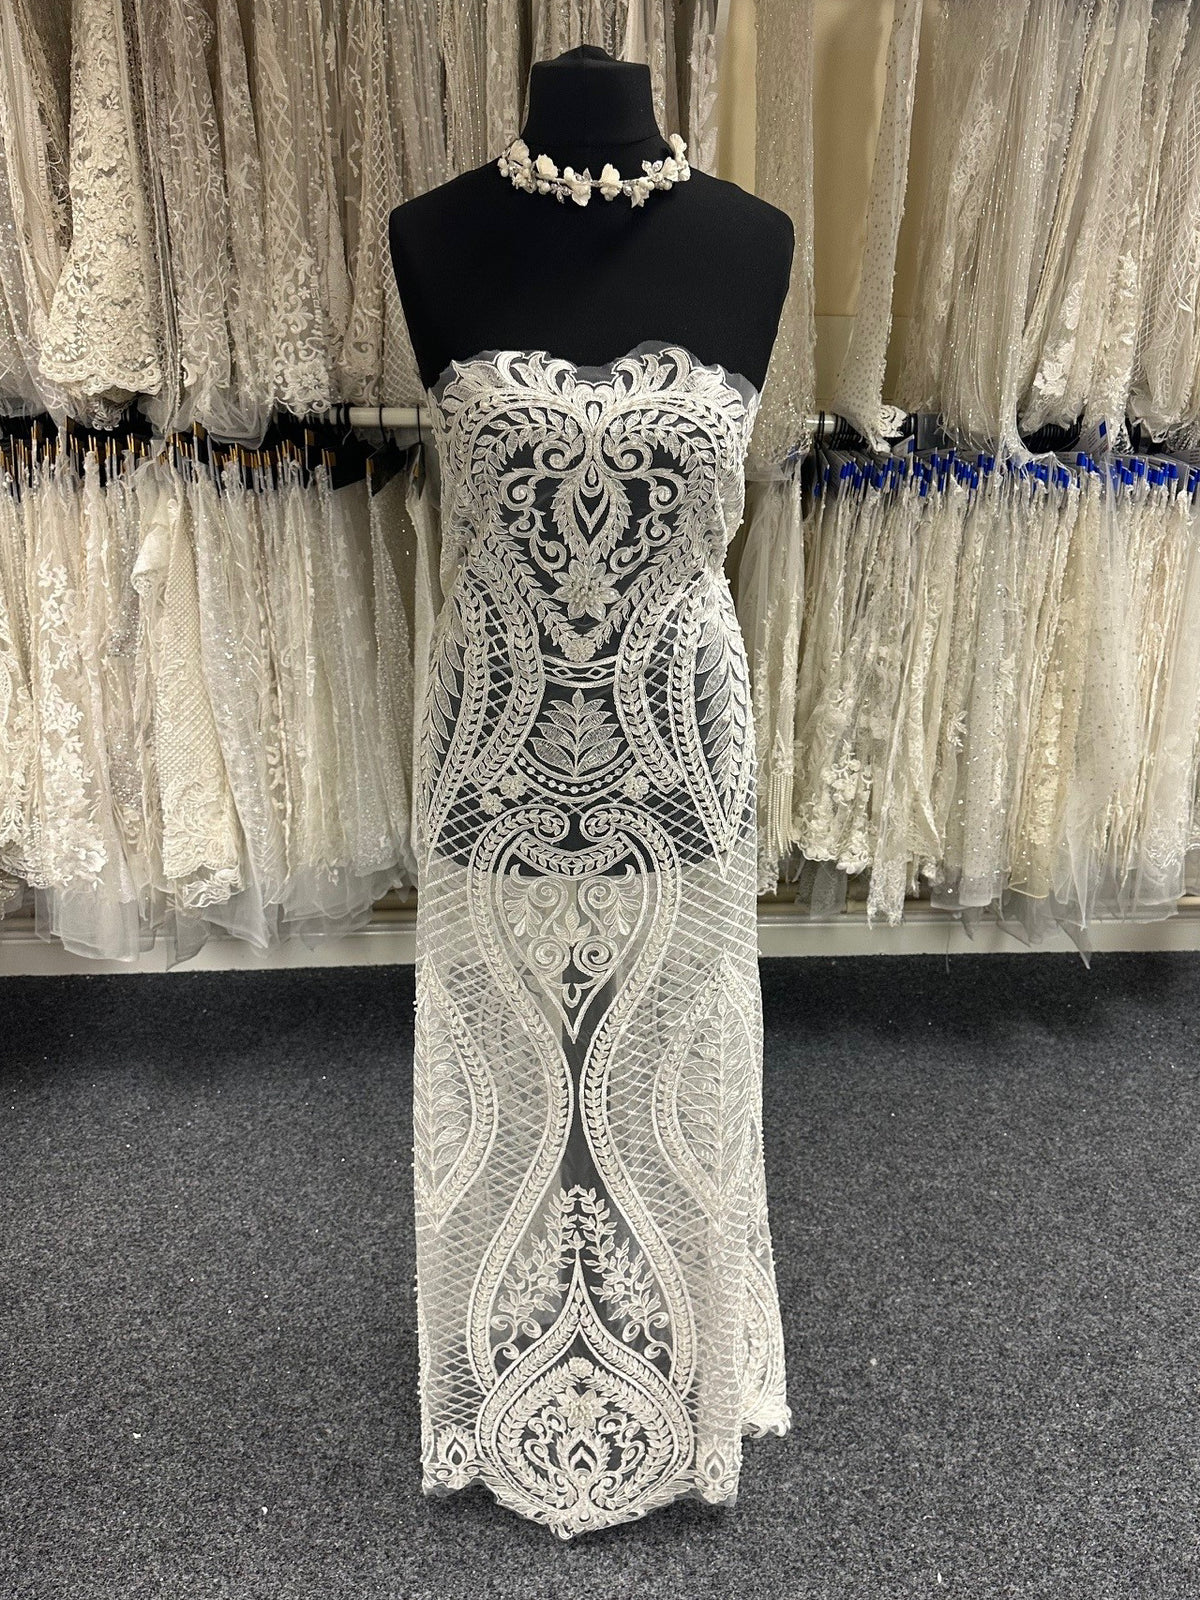 Ivory Corded Embroidery Lace - Blossom